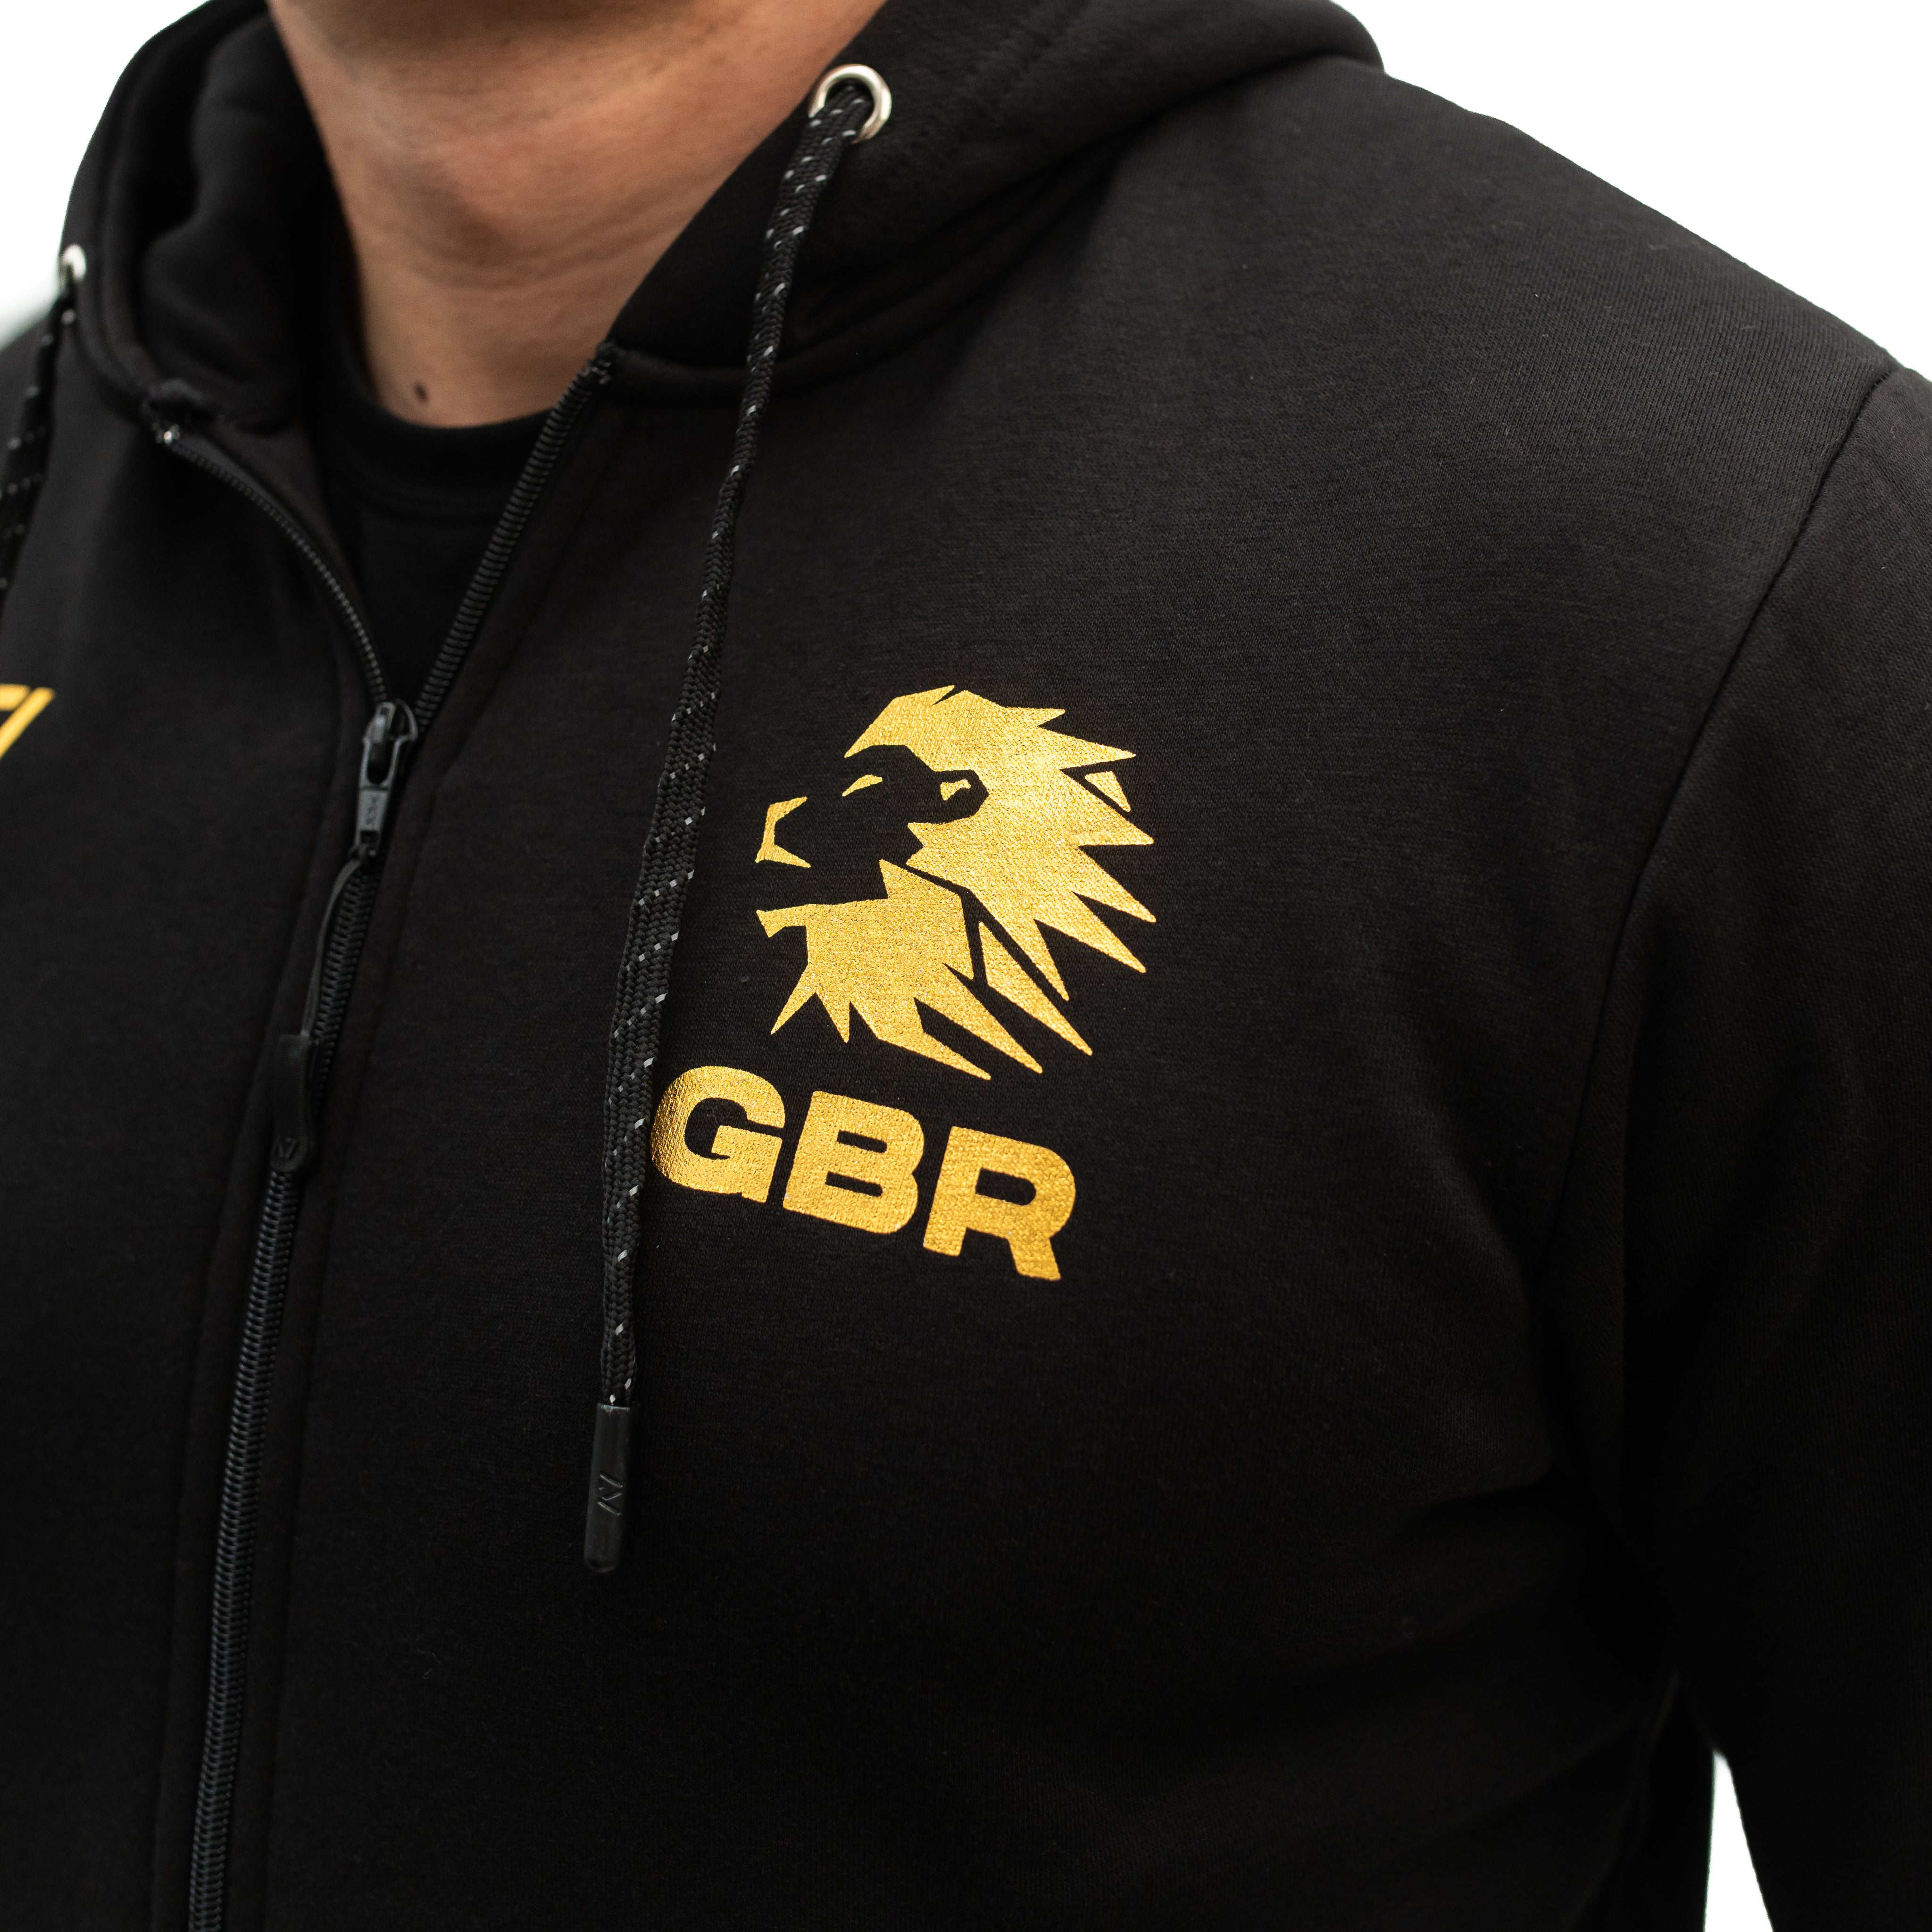 Purchase GB Gold Britannia zip up hoodie in UK and Europe from A7 UK. A7 have the best Bar Grip Tshirts, shipping to UK and Europe from A7 UK. Go Far is our newest design on our zip up hoodie. Demand Greatness on the front with an eagle on the back, in a chromium colourway! A7UK supplies the best Powerlifting apparel for all your workouts. Available in UK and Europe including France, Italy, Germany, the Netherlands, Sweden and Poland.